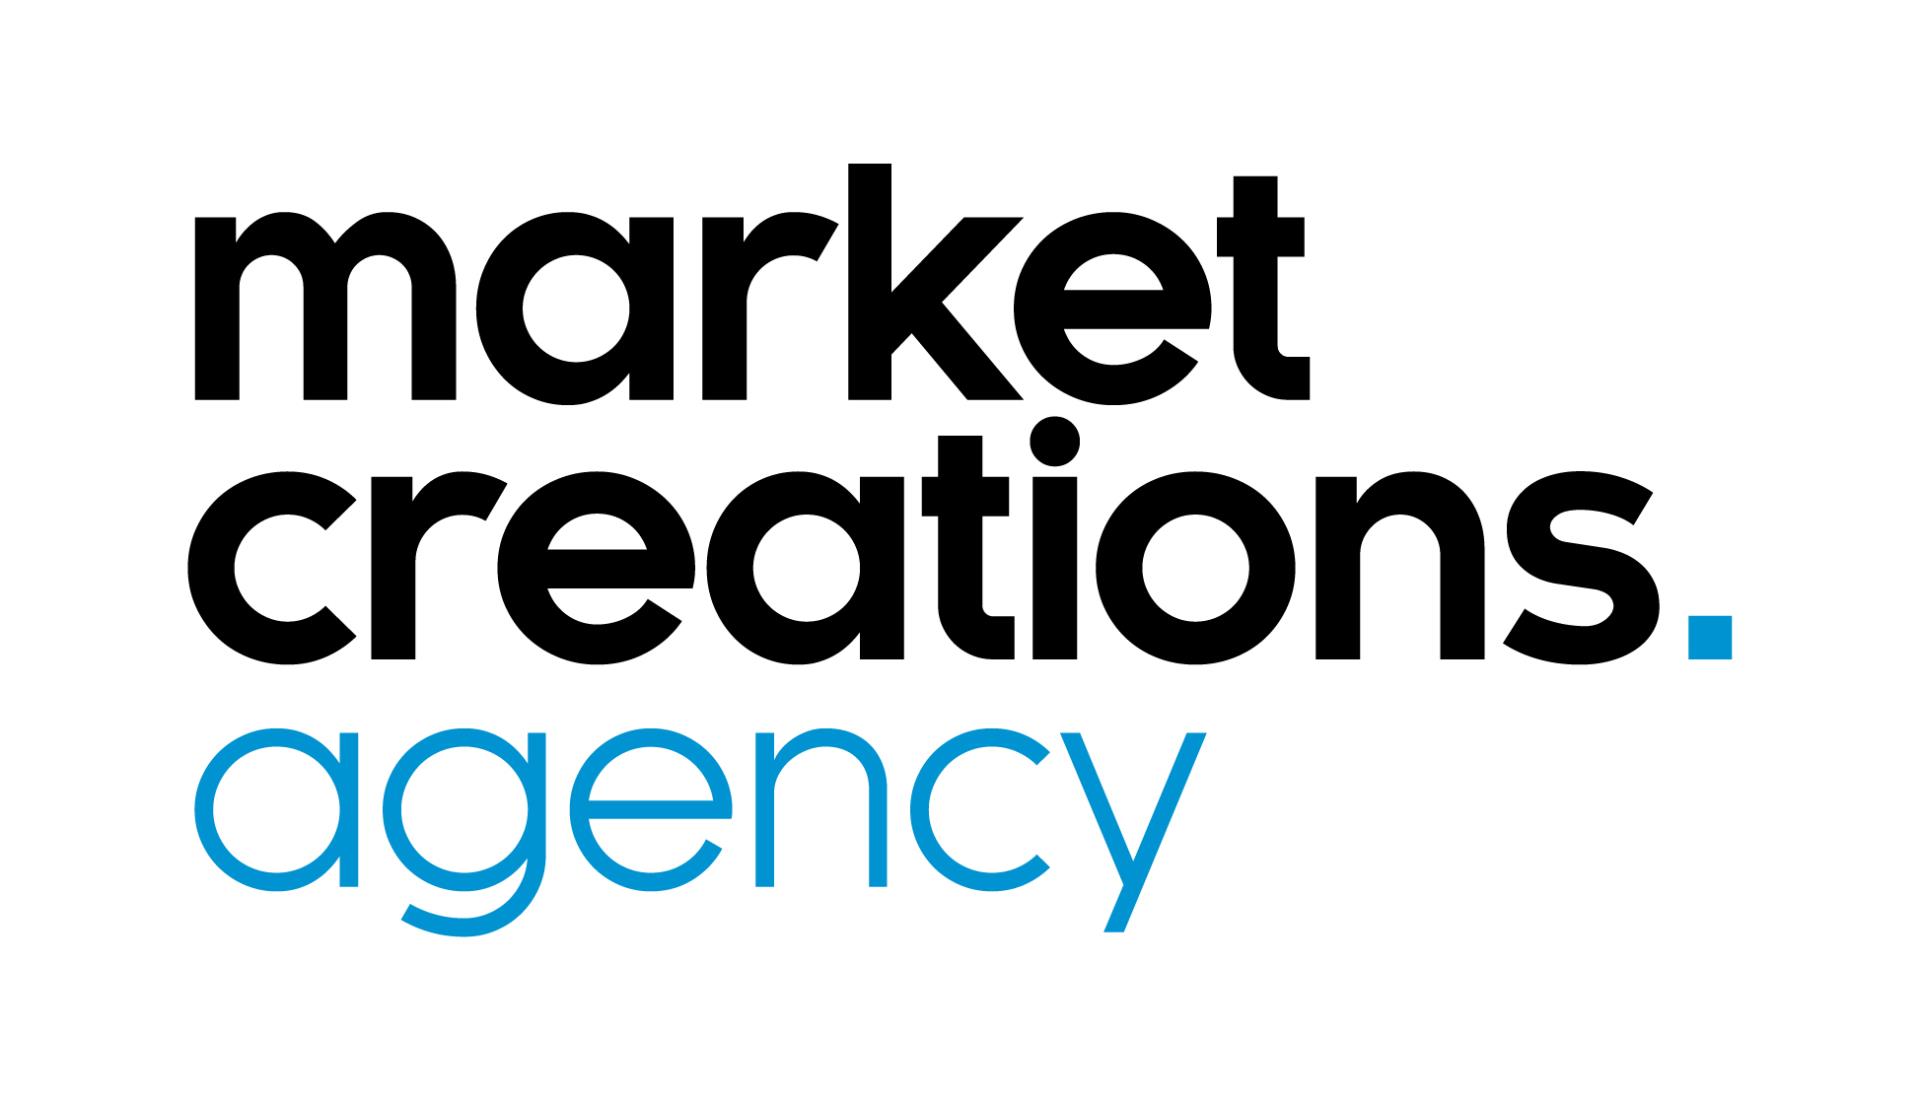 About Market Creations Agency Image